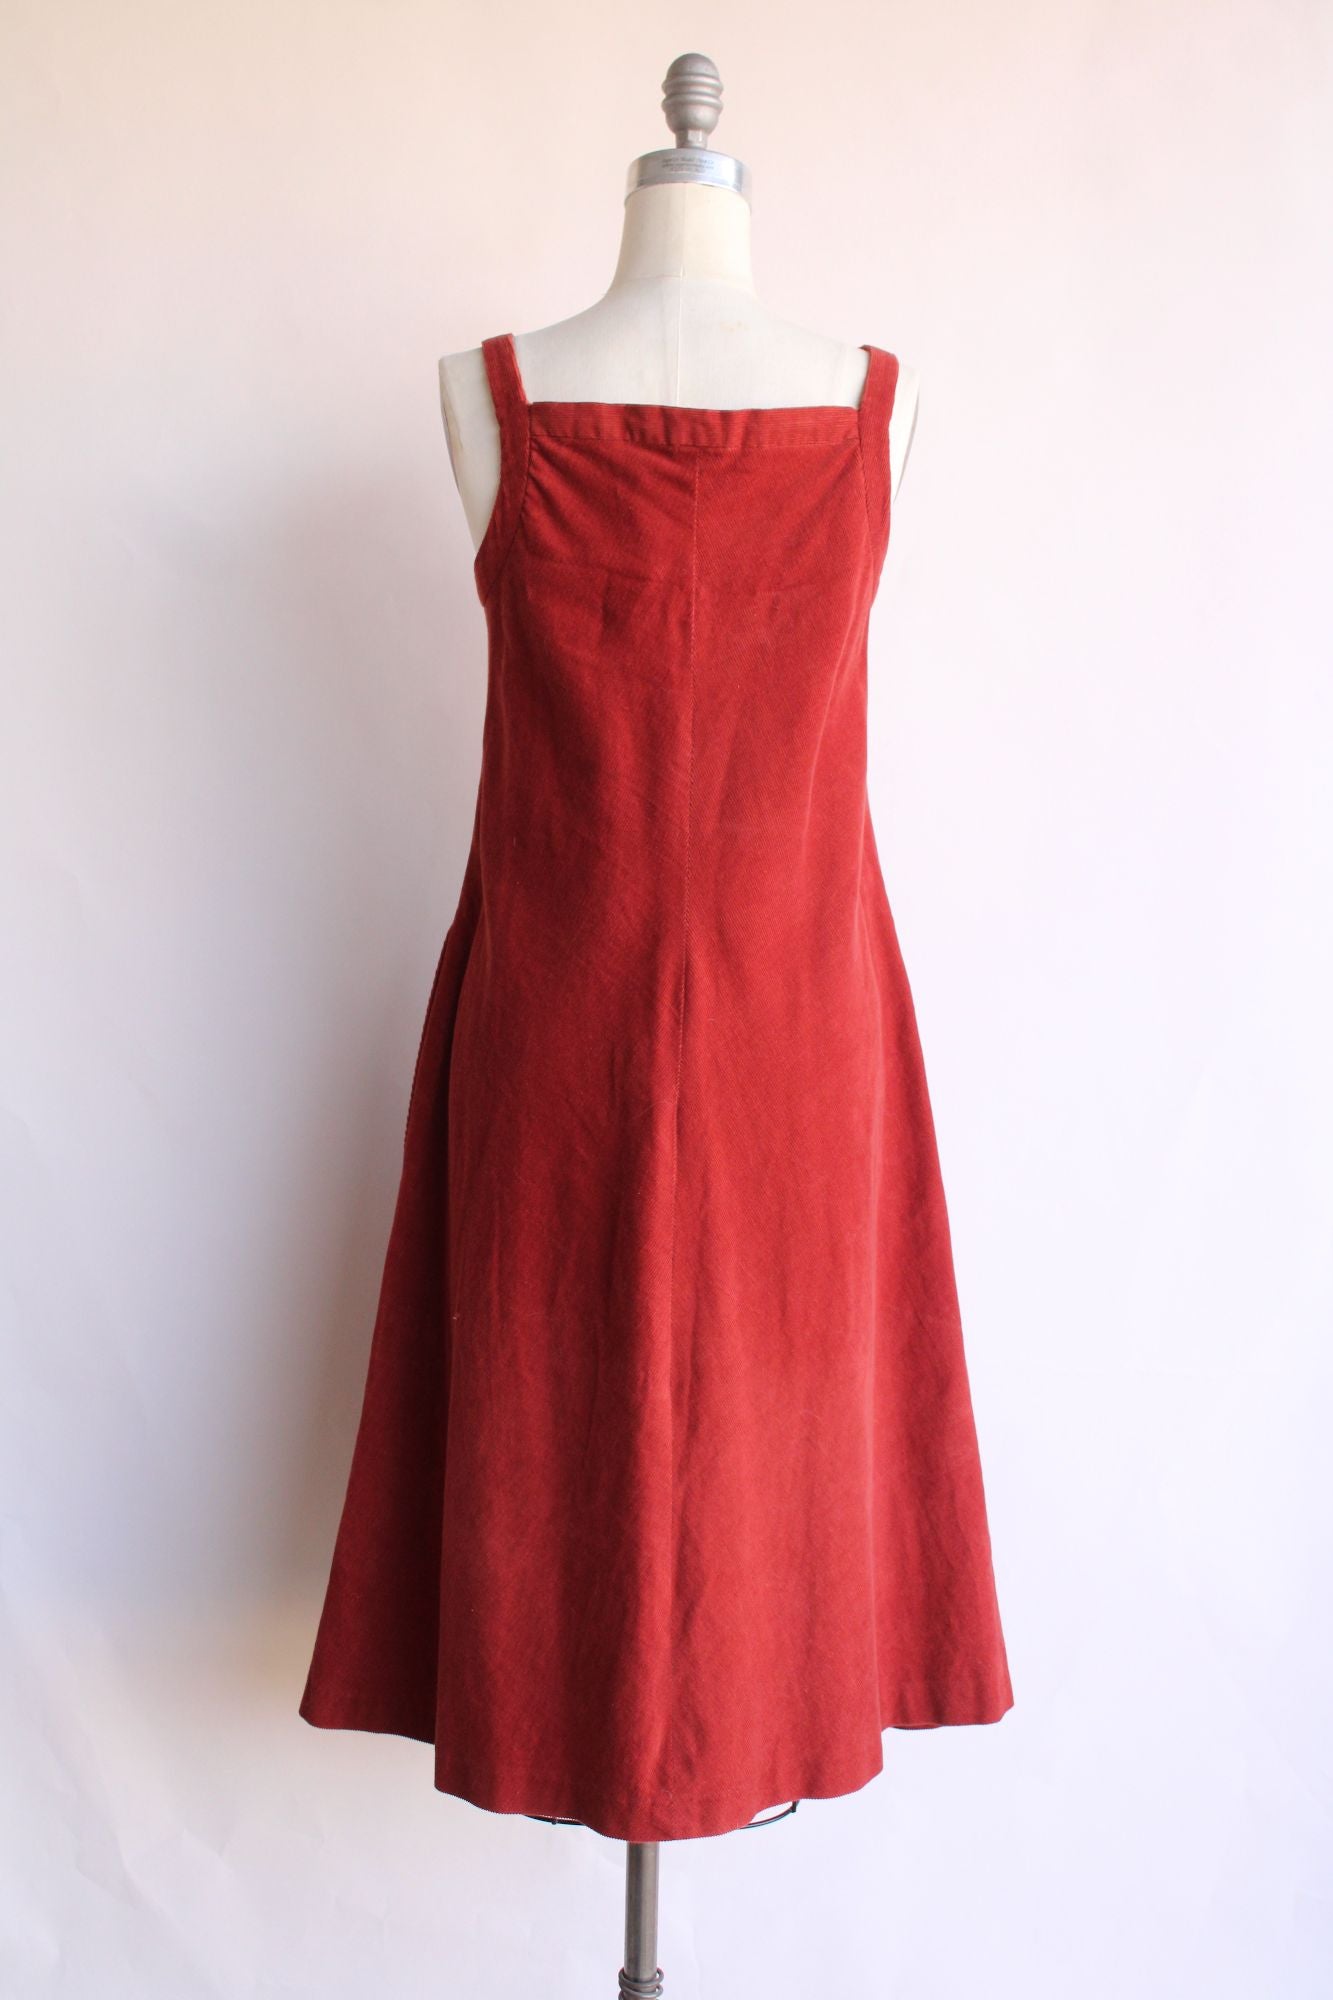 Womens Red Corduroy Dress with Pockets, Size Large, Pinafore, Adjustable Straps